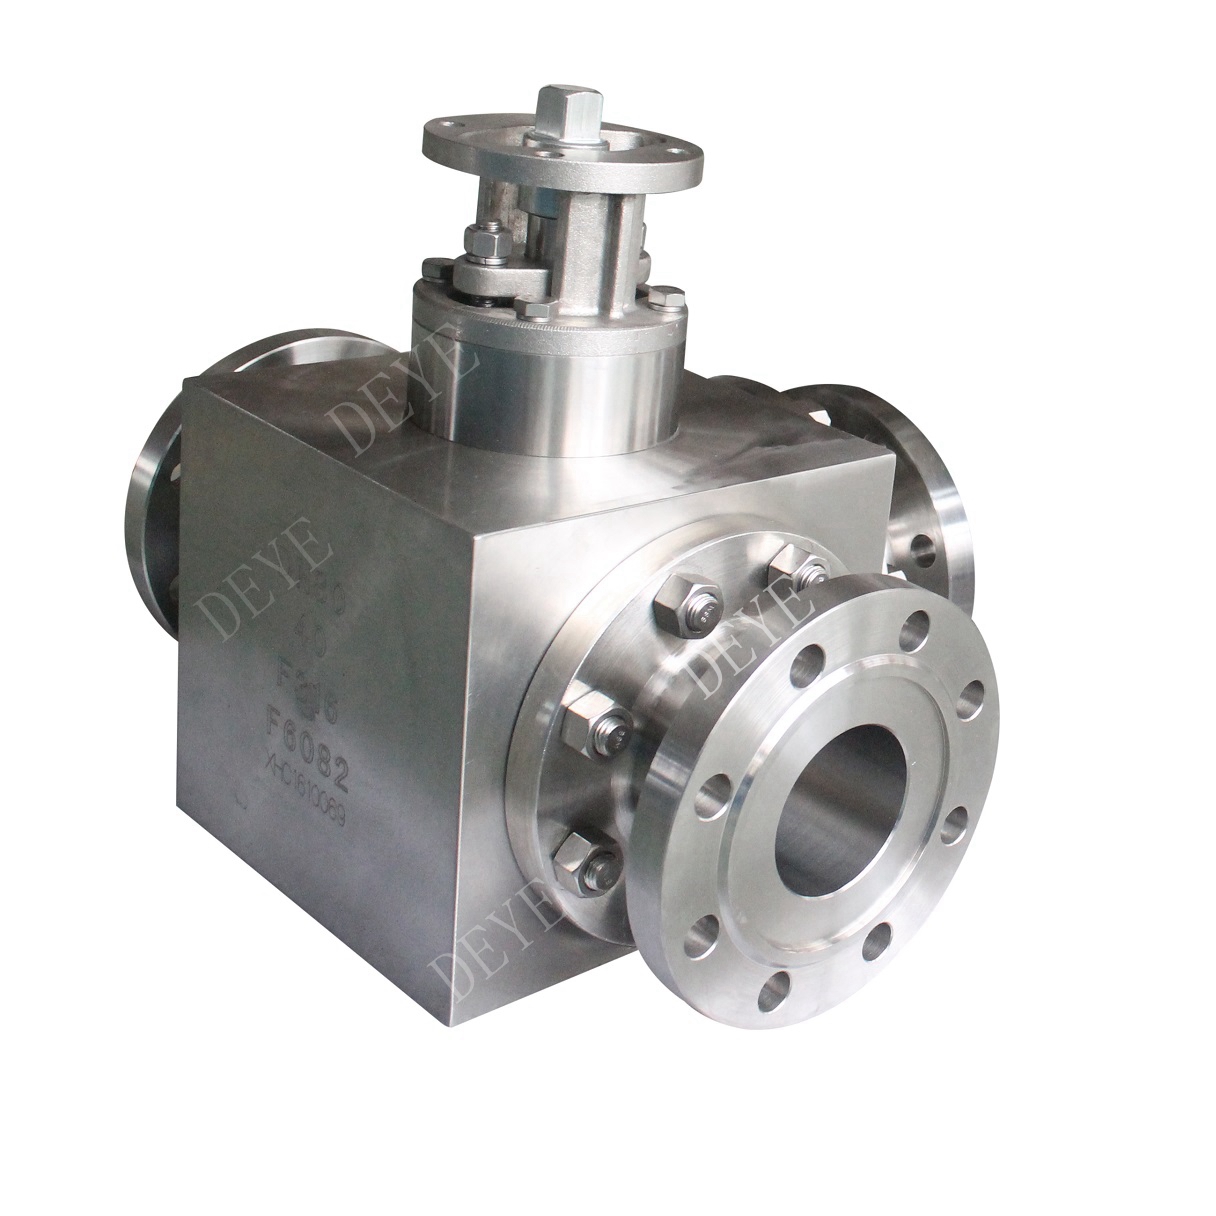 China OEM Ansi 150lbs Bb Gate Valve -
  300LBS stainless steel 3-way ball valve with Flanged ends  BV-300-3WYF – Deye